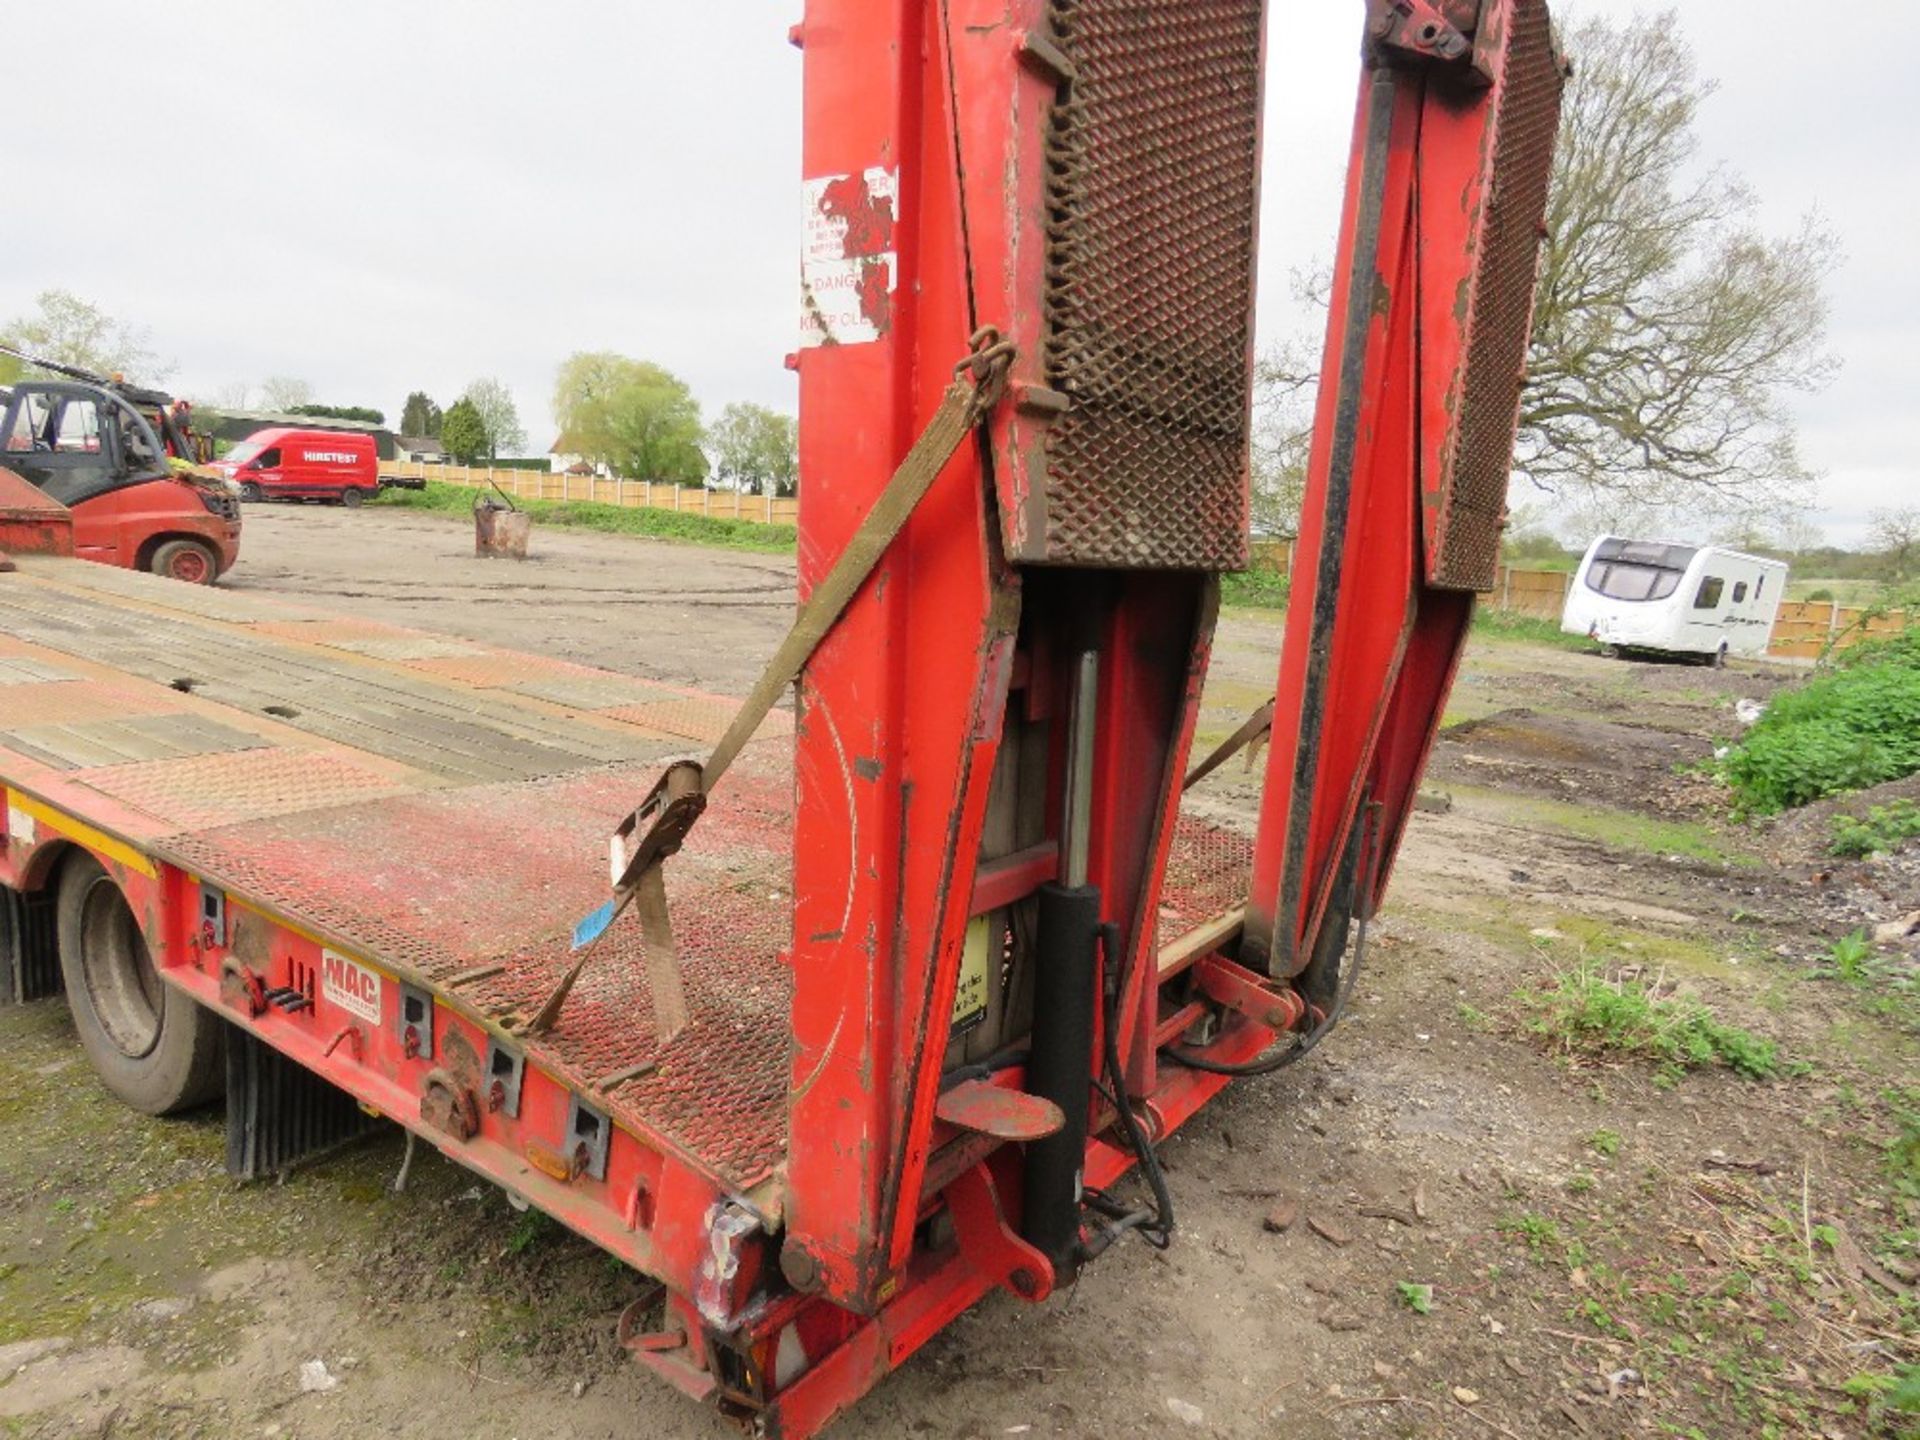 MAC S3-44 TRIAXLE LOW LOADER TRAILER WITH WINCH, YEAR 2015. TESTED UNTIL 30TH APRIL 2025. 13.6 OVERA - Image 11 of 15